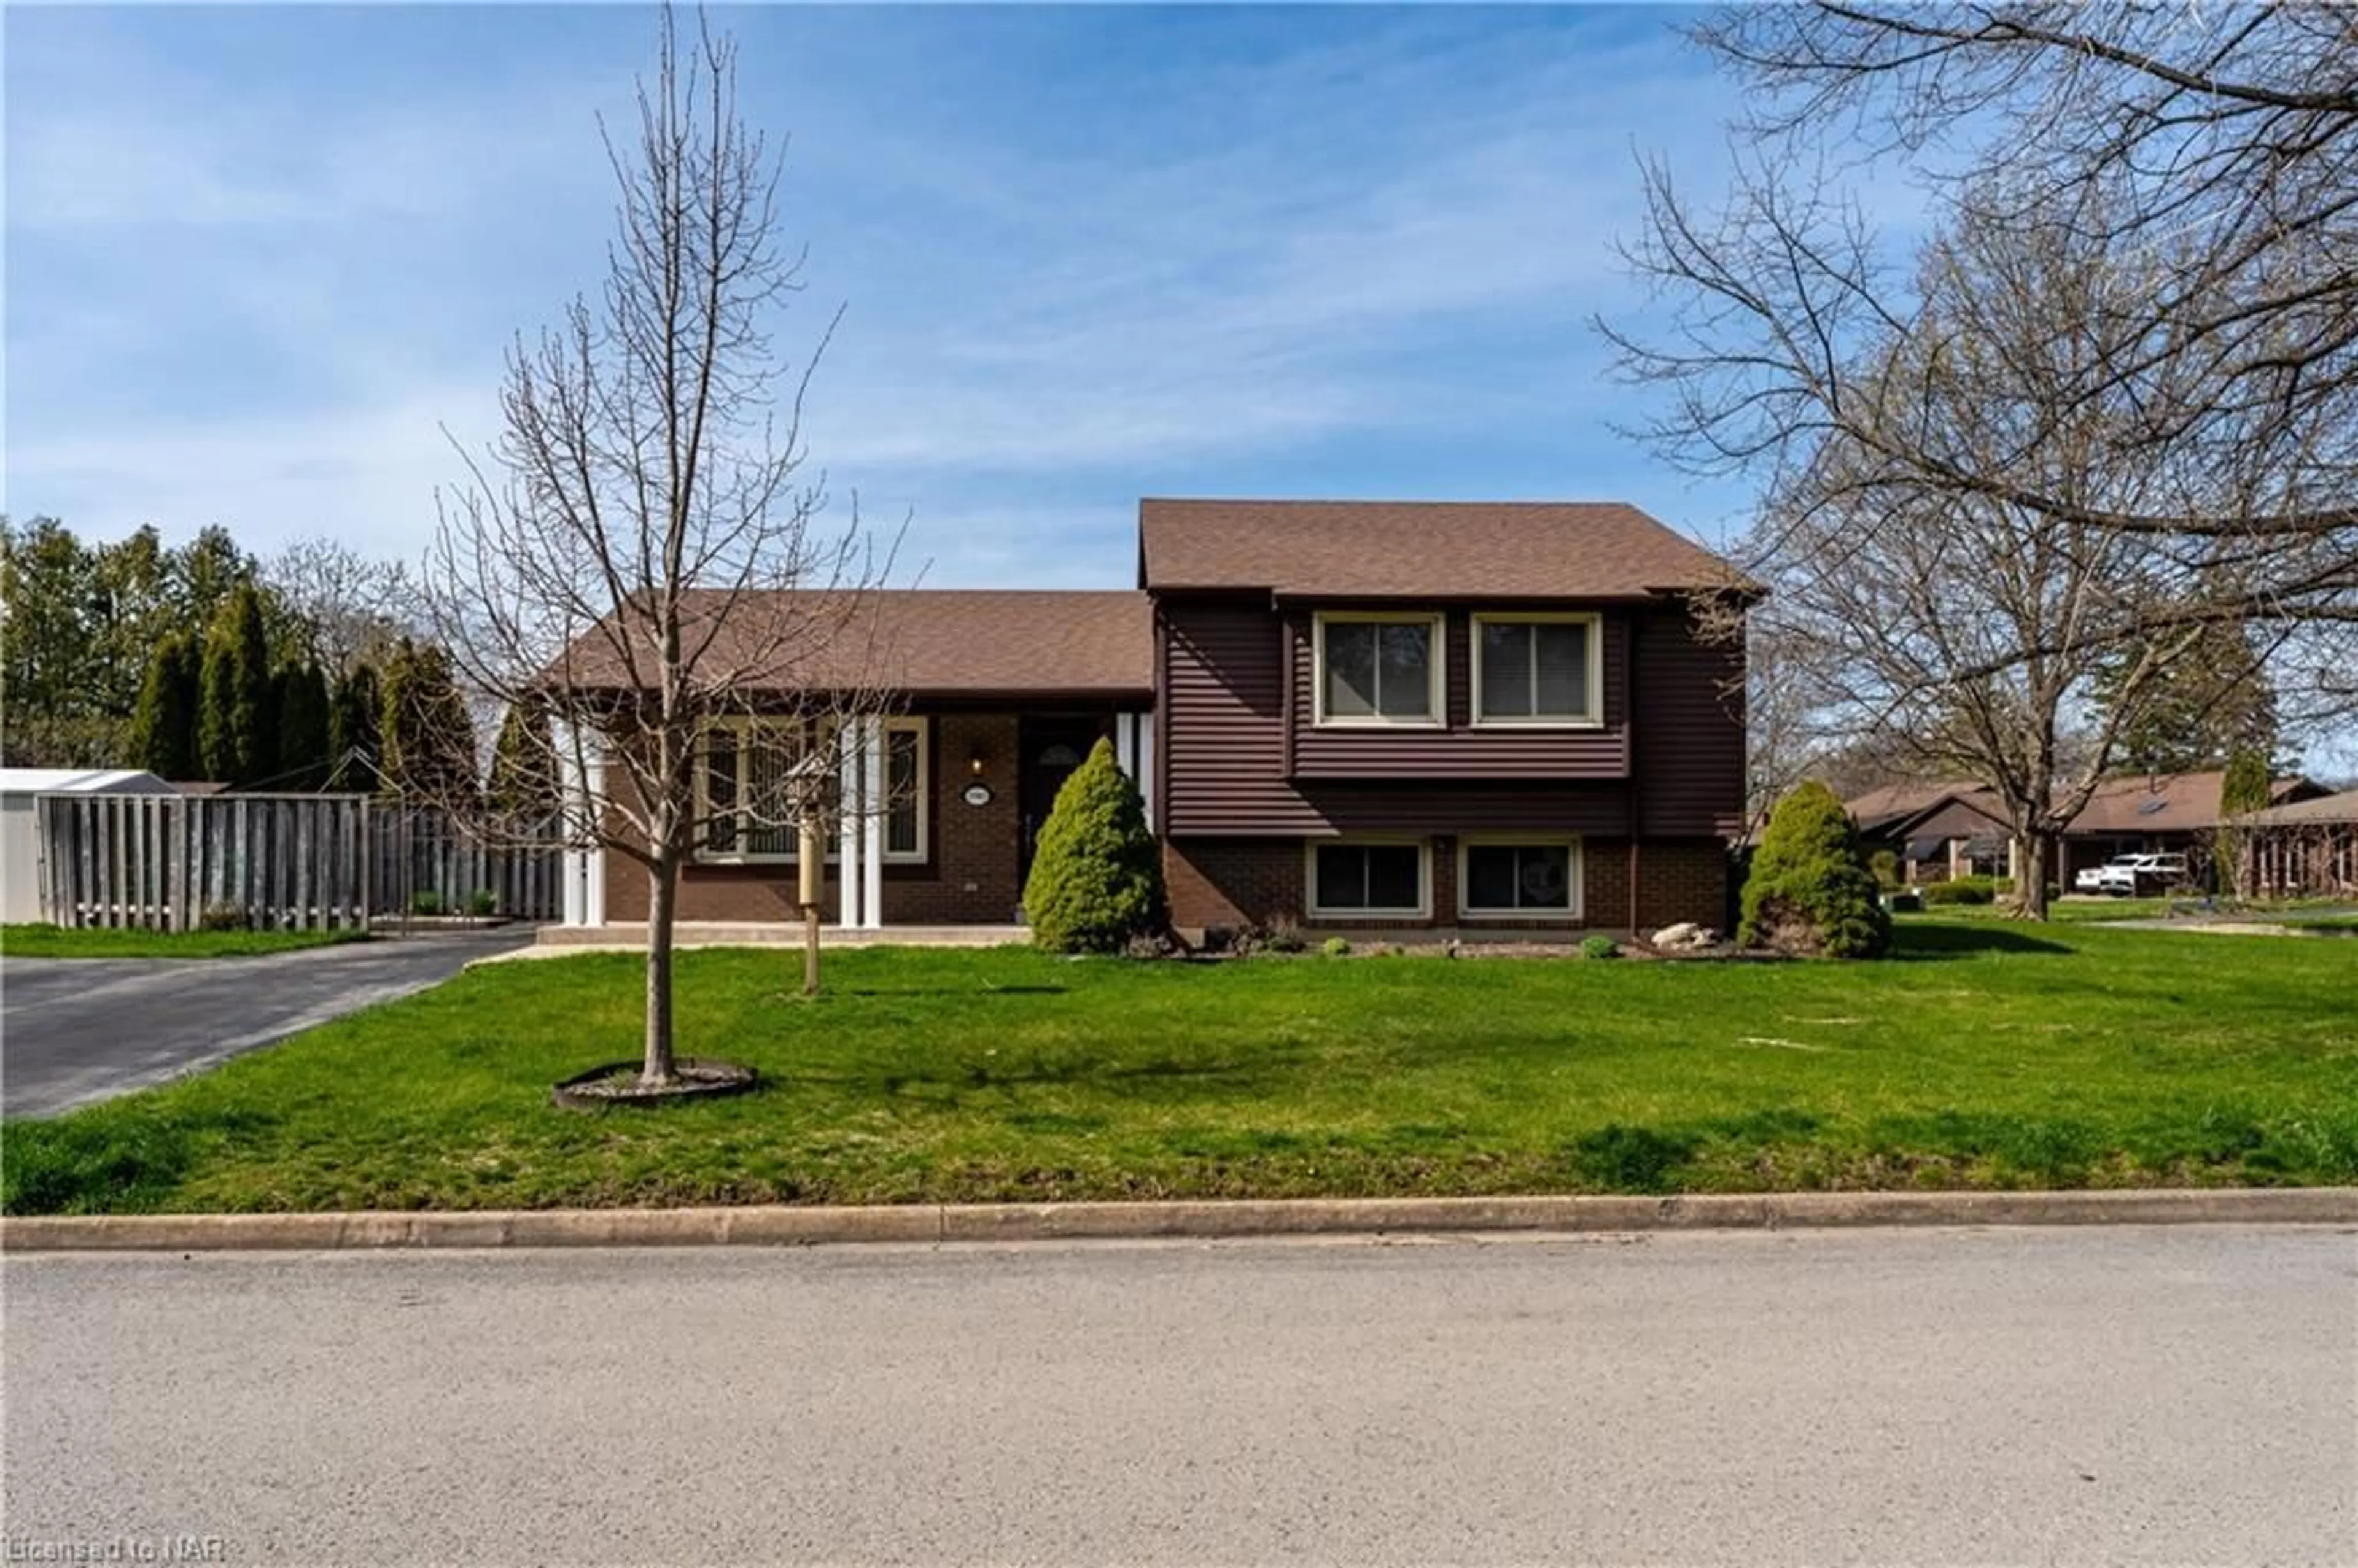 Frontside or backside of a home for 2 The Pinery St, St. Catharines Ontario L2M 6M6